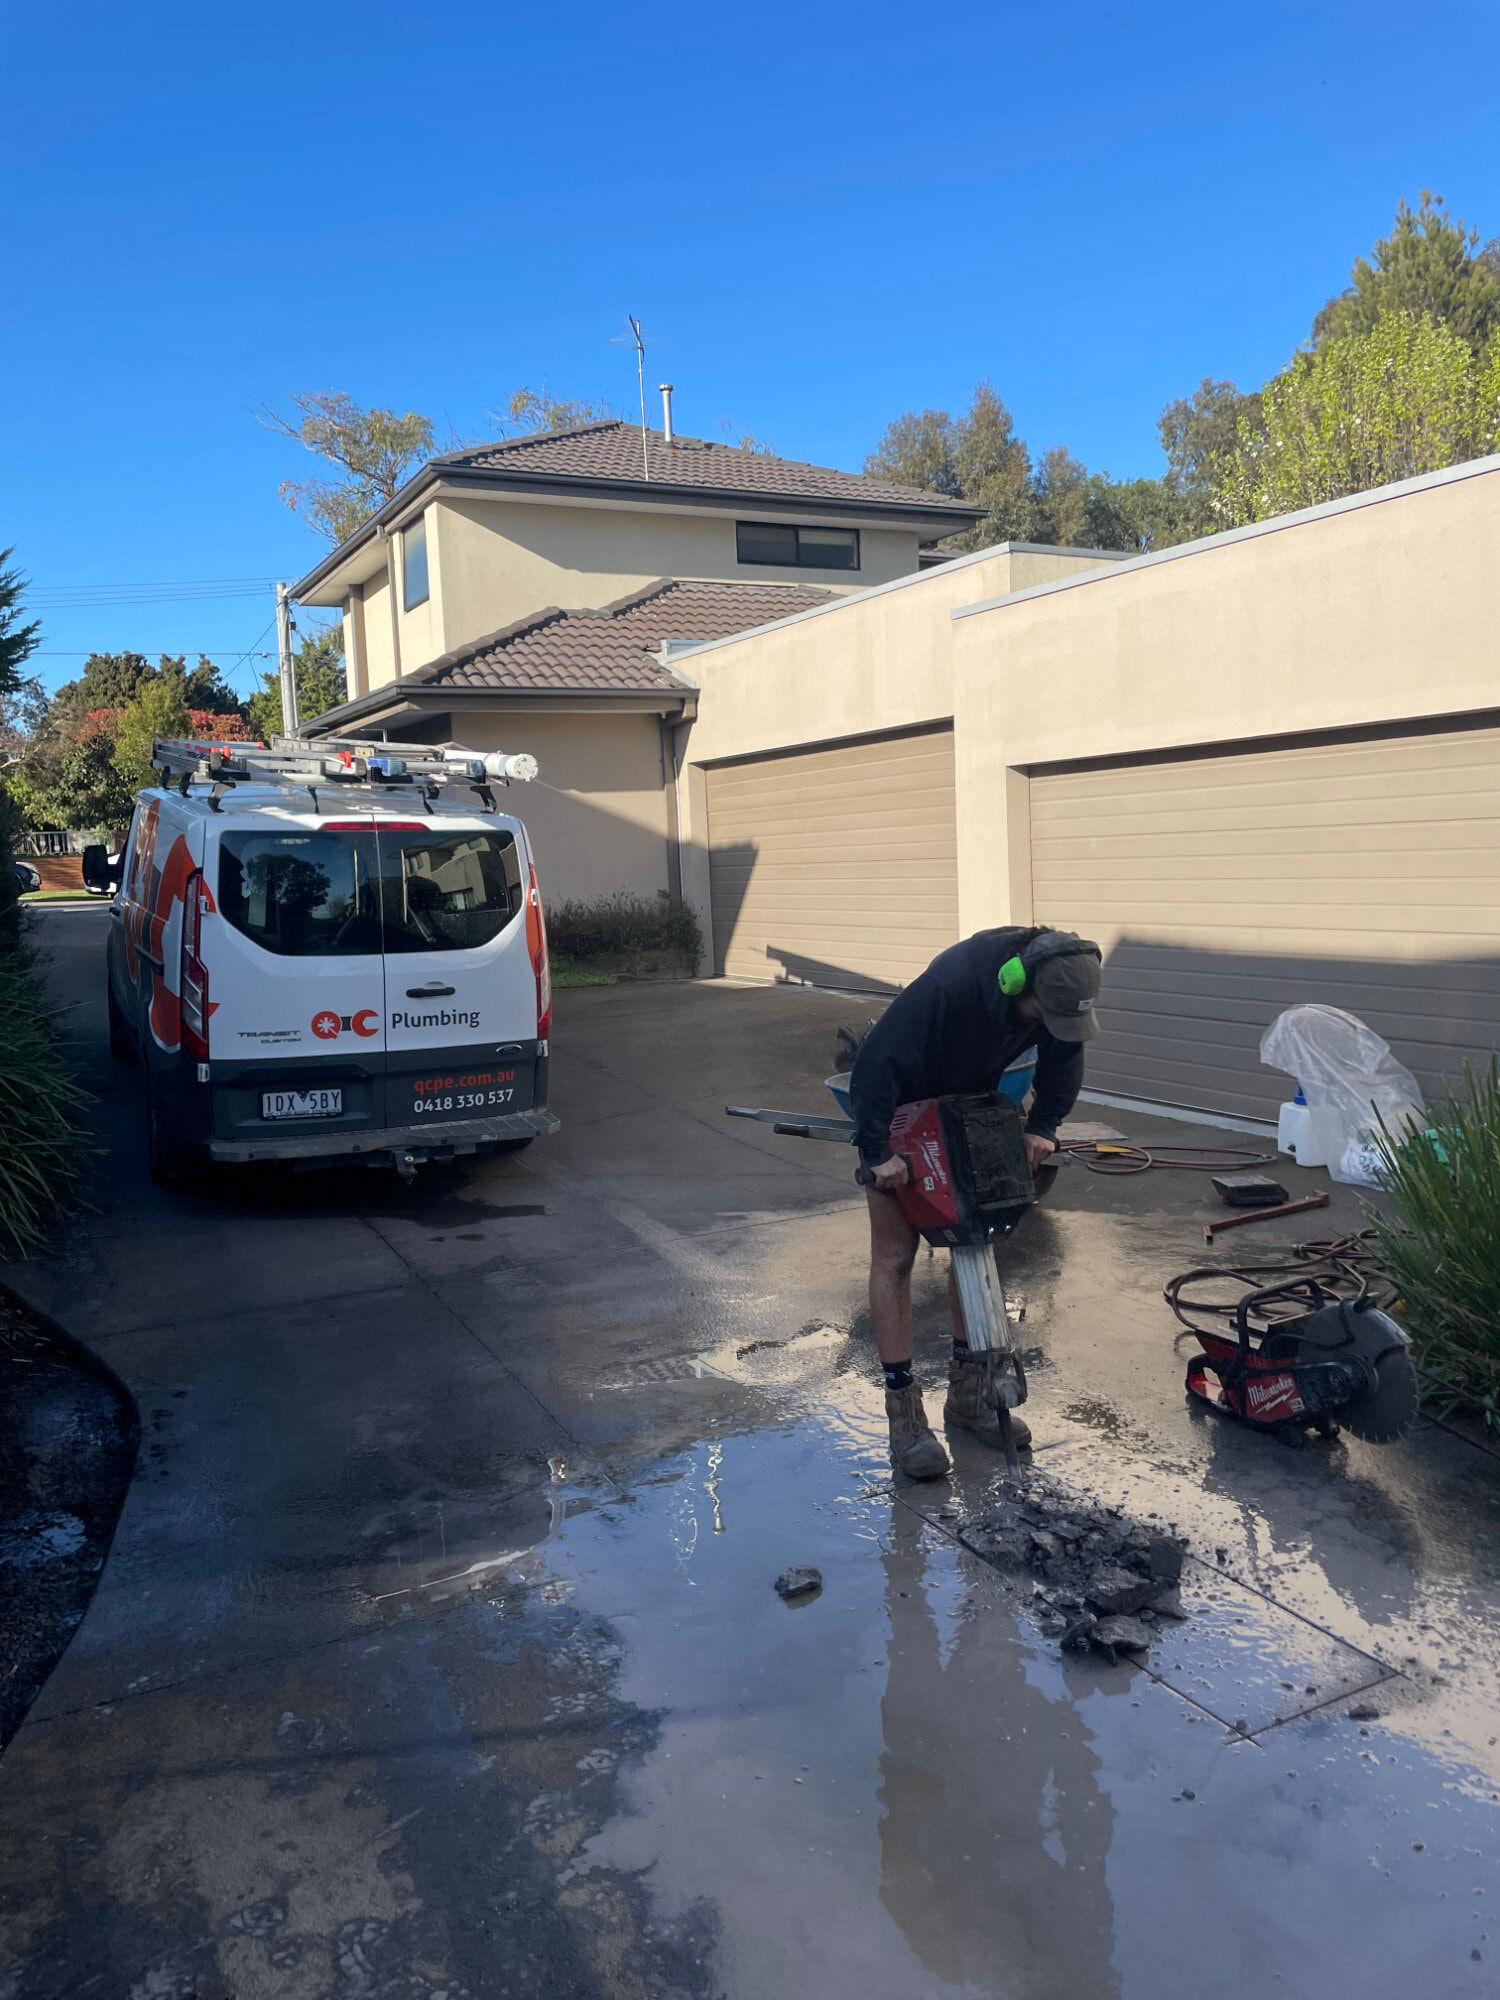 Breaking up concrete to replace burst pipe